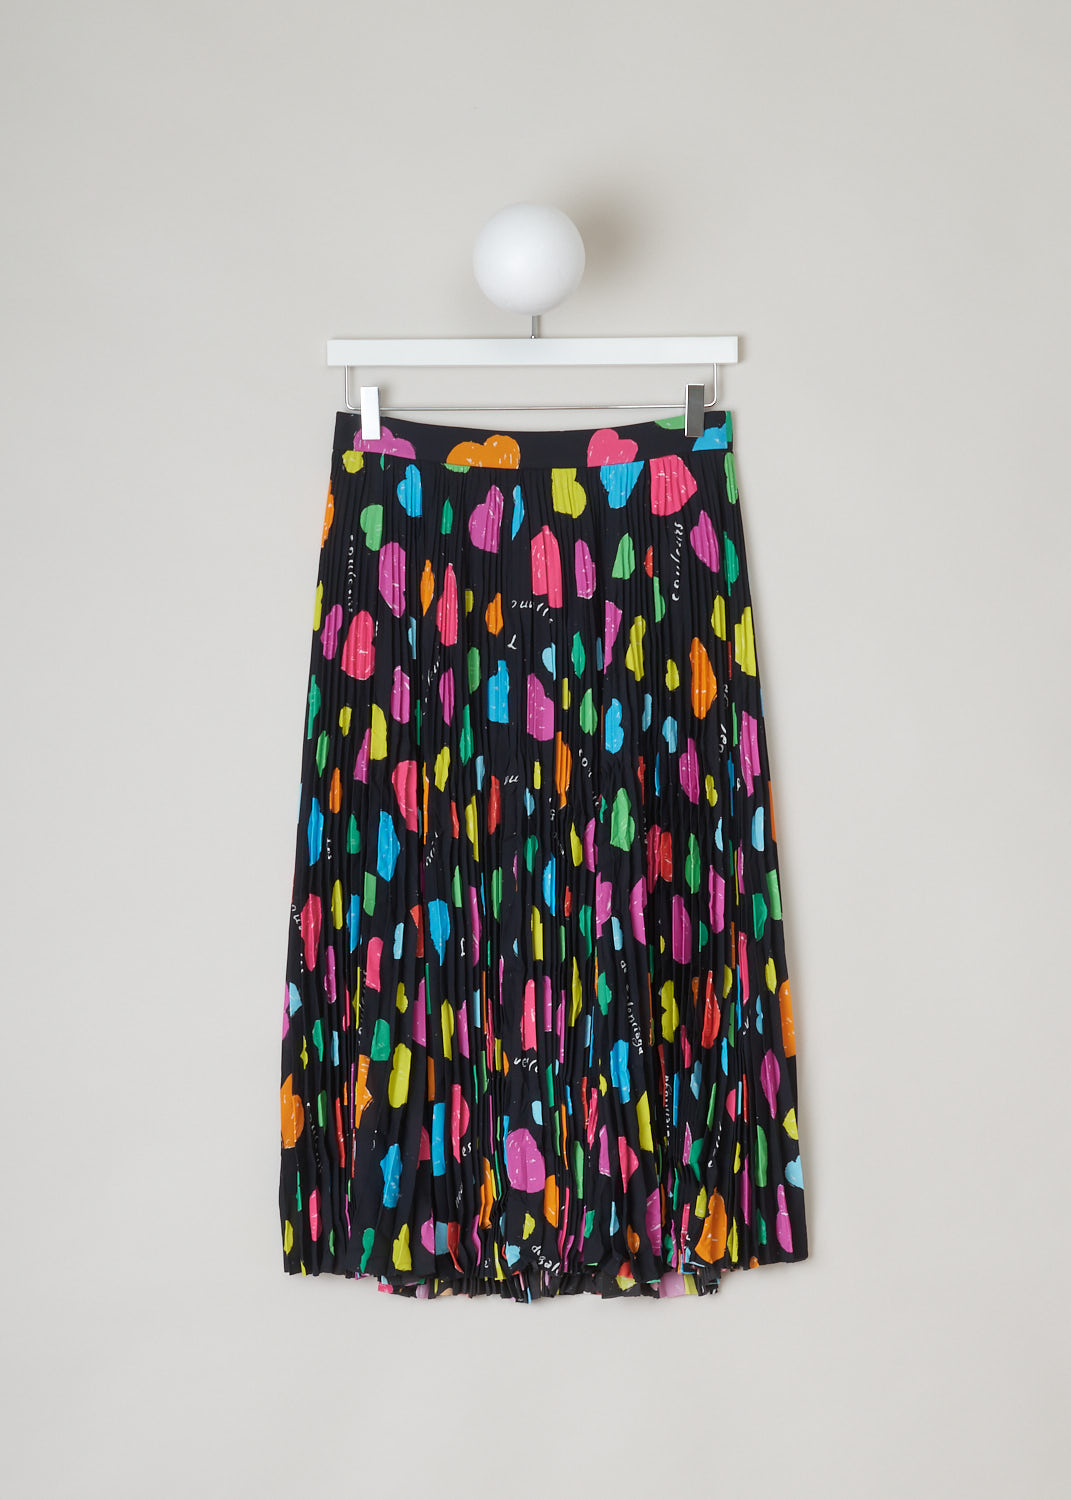 Balenciaga, Black multi-color heart print skirt, 659067_TKL09_1000_black, black, red, yellow, orange, blue, green, front. Heart-printed skirt, the black background color makes the multi-colored hearts pop that much more, this model is pleated all-around from the waistband down. Closure options on this skirt are two metal hook supported by a concealed zipper. 